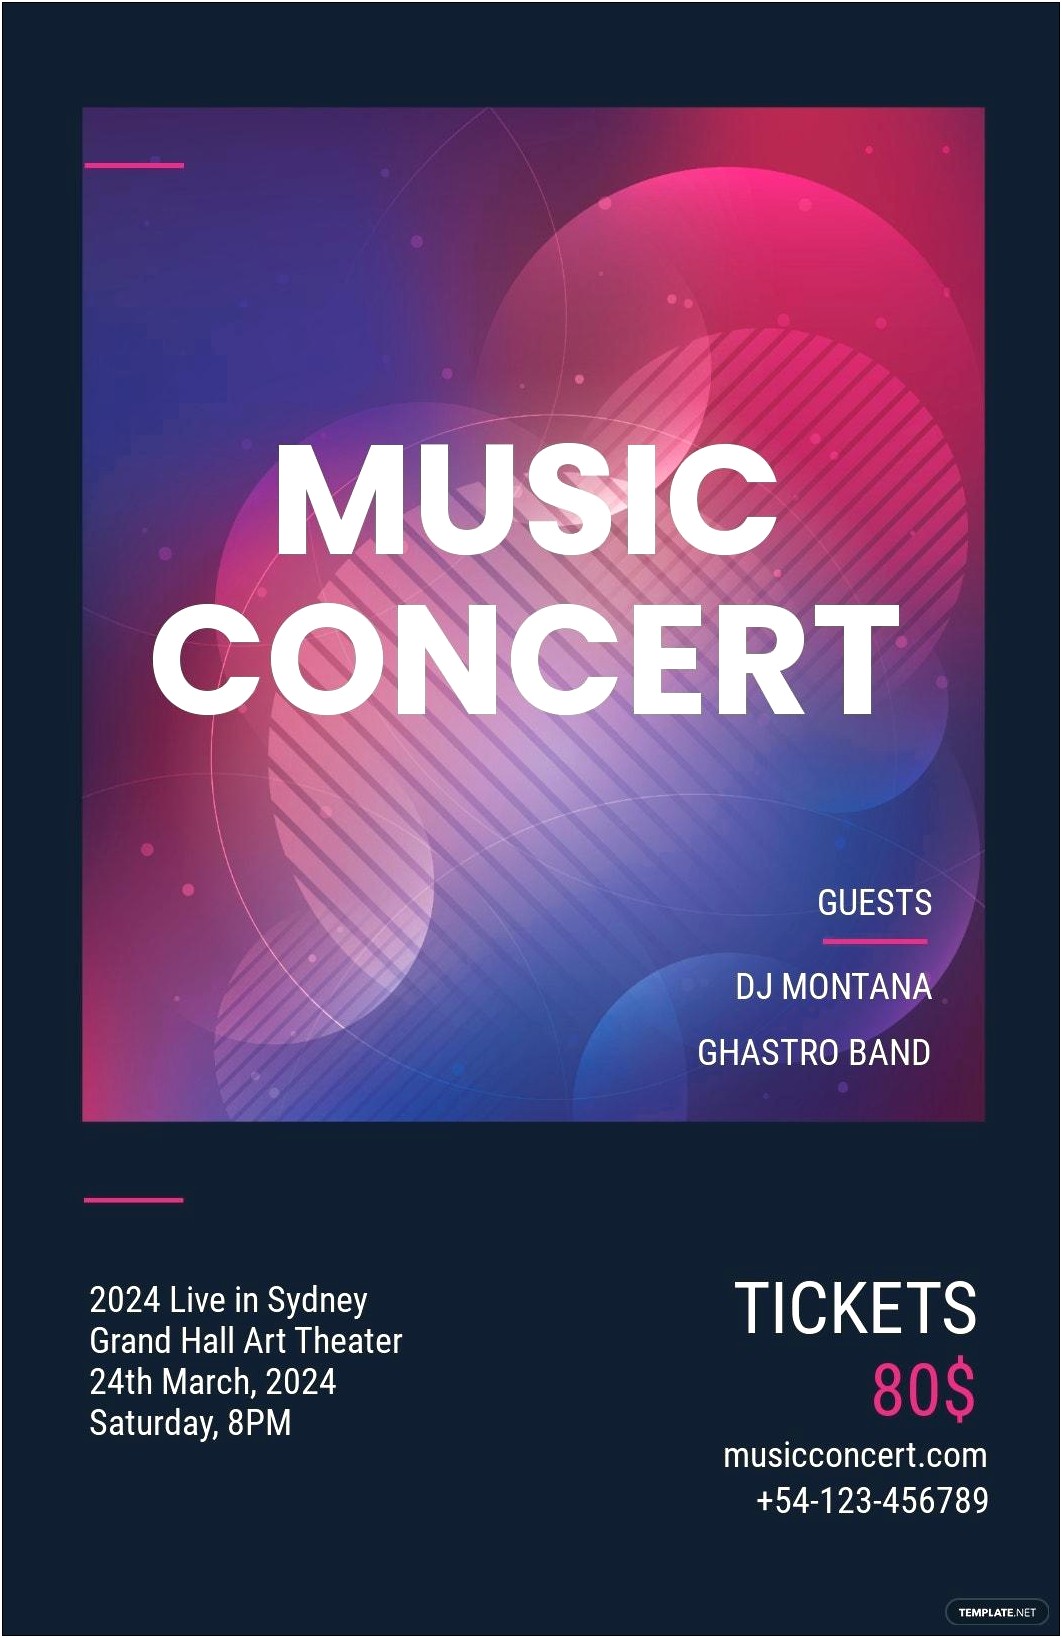 Free Adobe Indesign Templates For Concert Posters